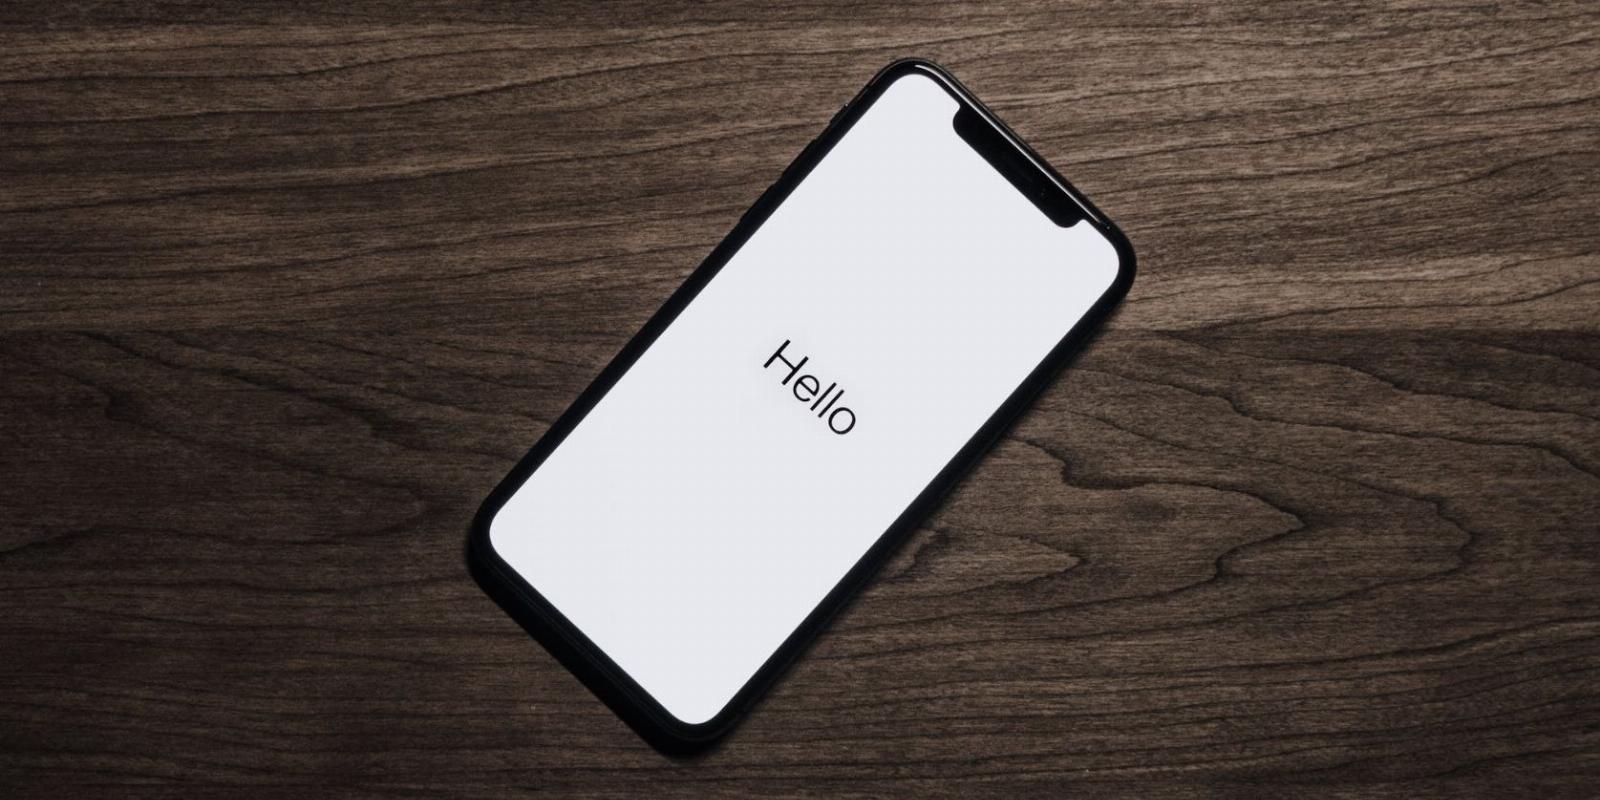 Can You Change the Font on Your iPhone?